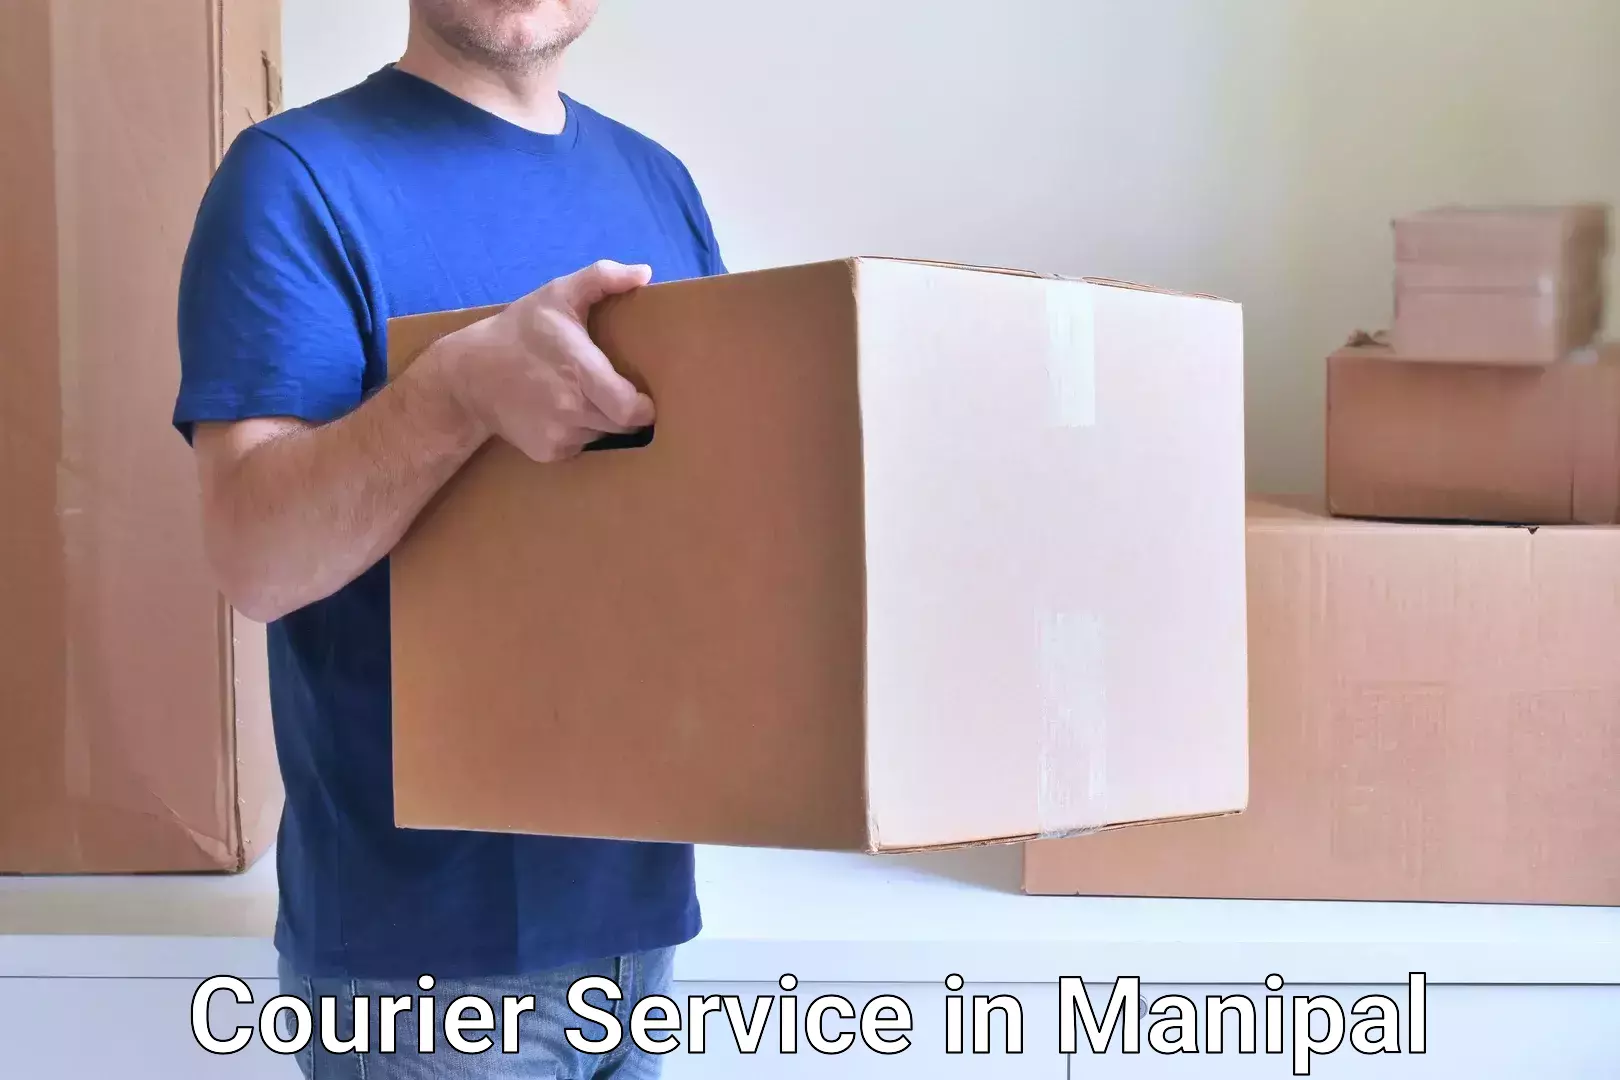 Shipping and handling in Manipal